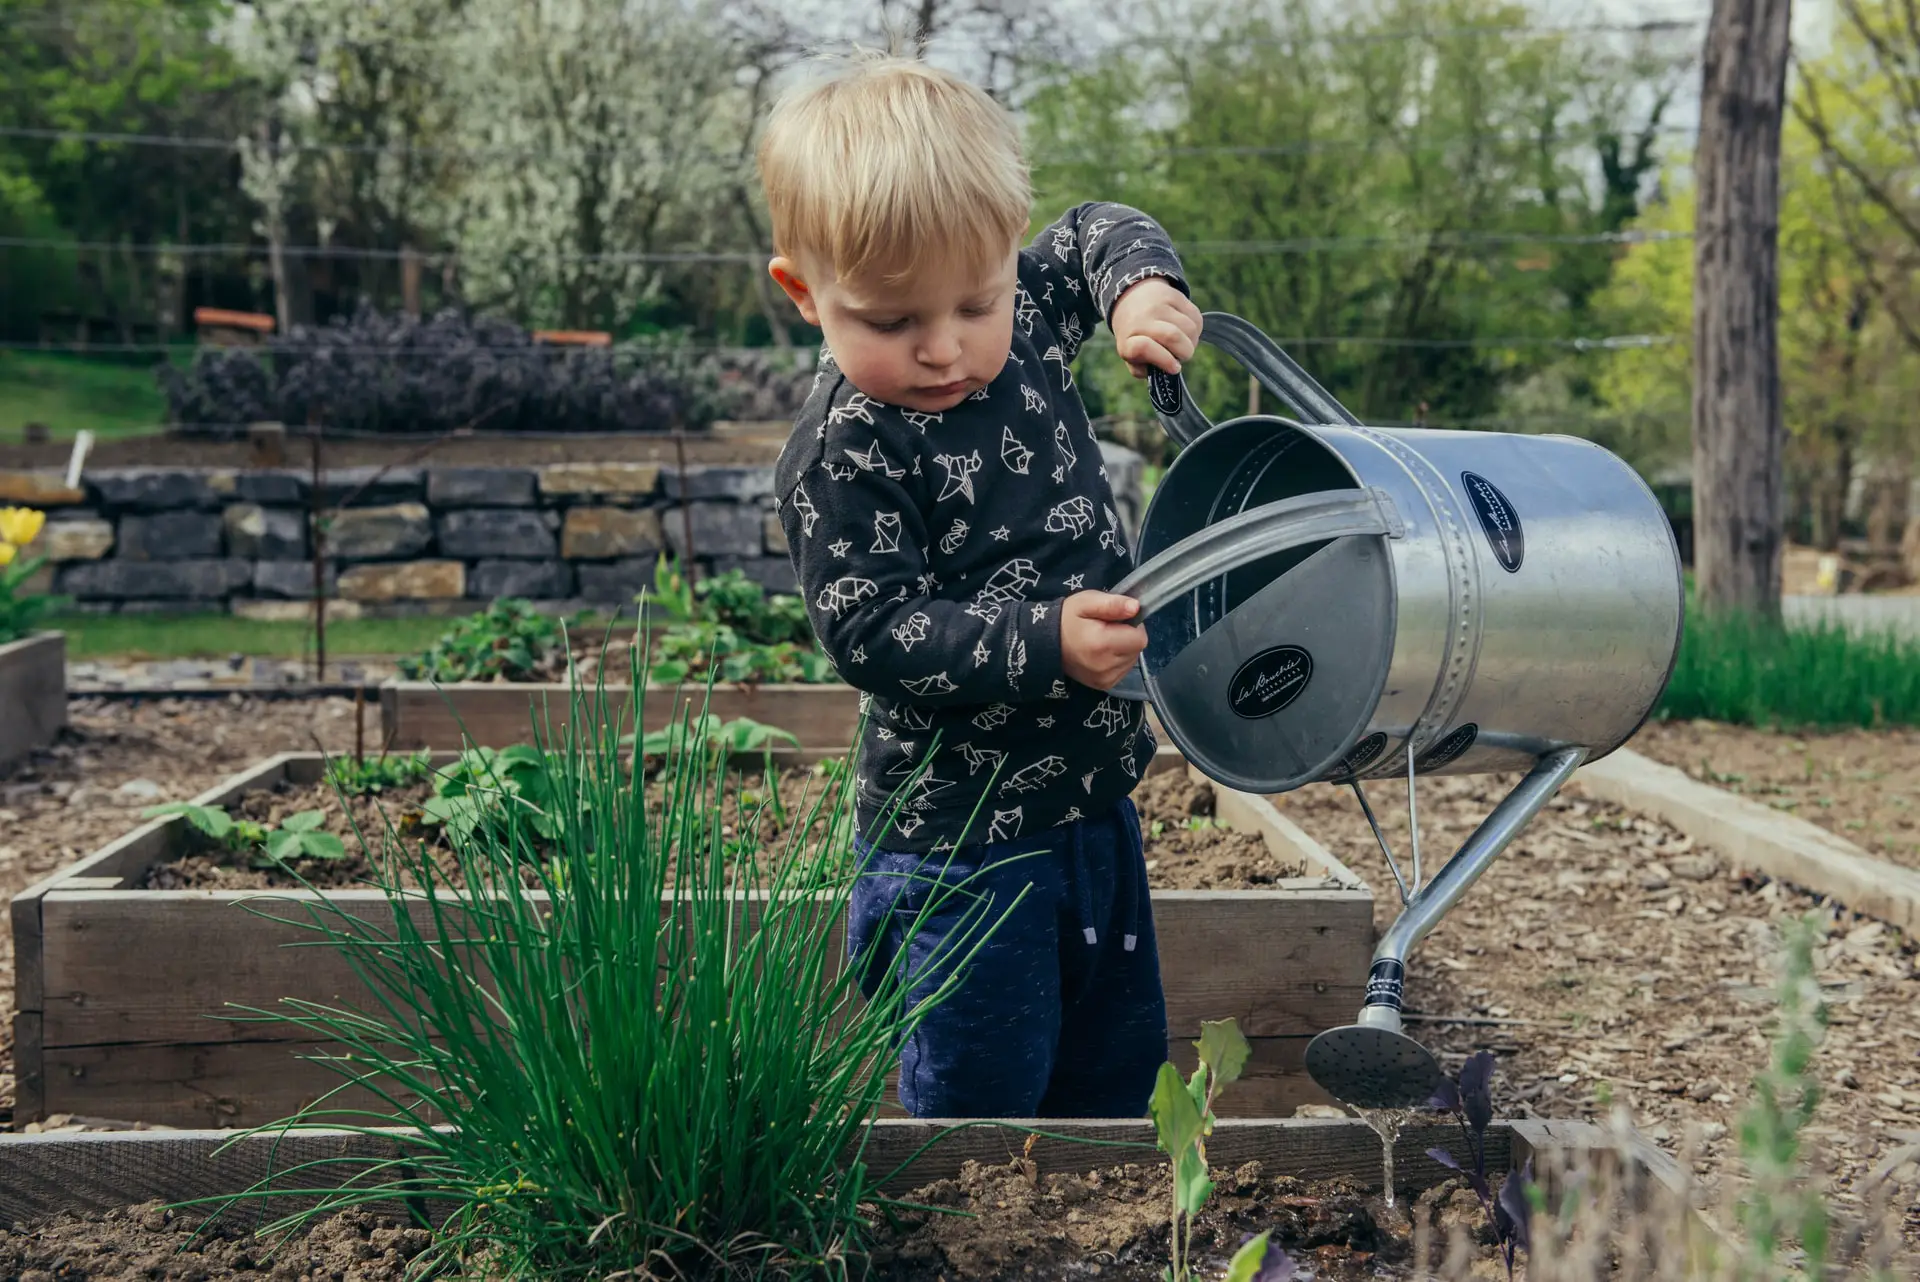 Keeping Kids: Engaged Simple Garden Projects